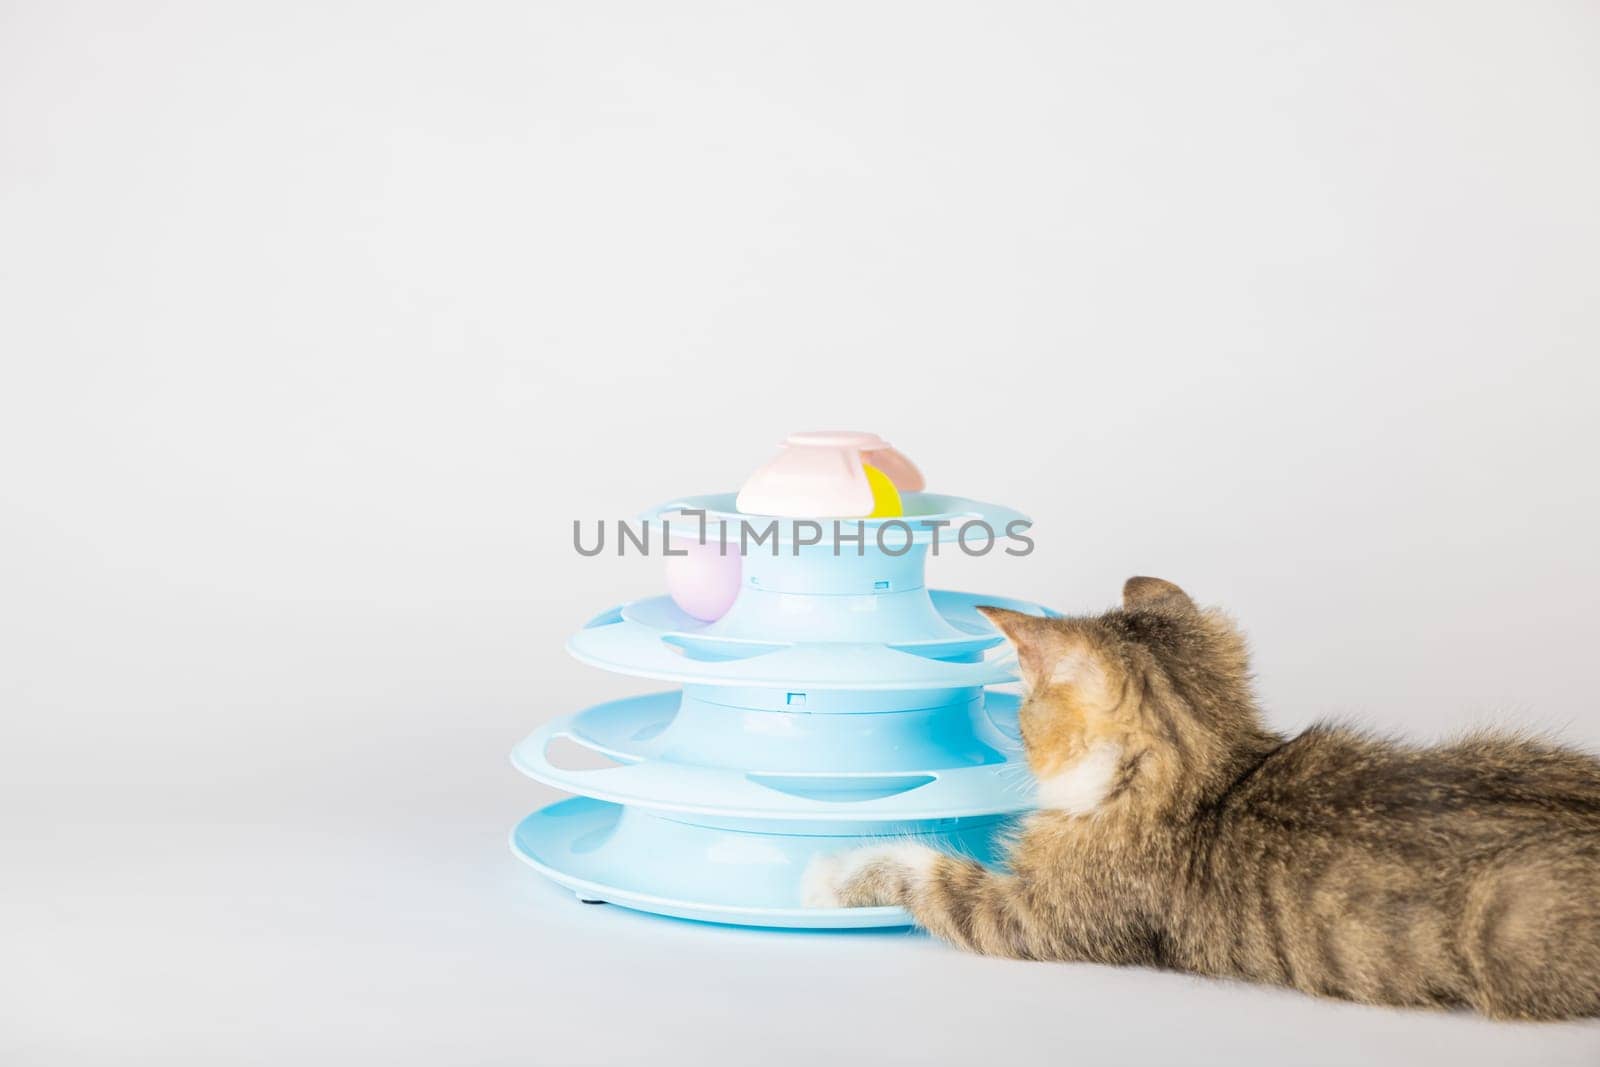 A cute kitten, with fur as orange as the sunset, is having a blast with a blue toy pyramid spiral tower. Batting at colorful balls, this funny and adorable feline is the epitome of a happy pet.